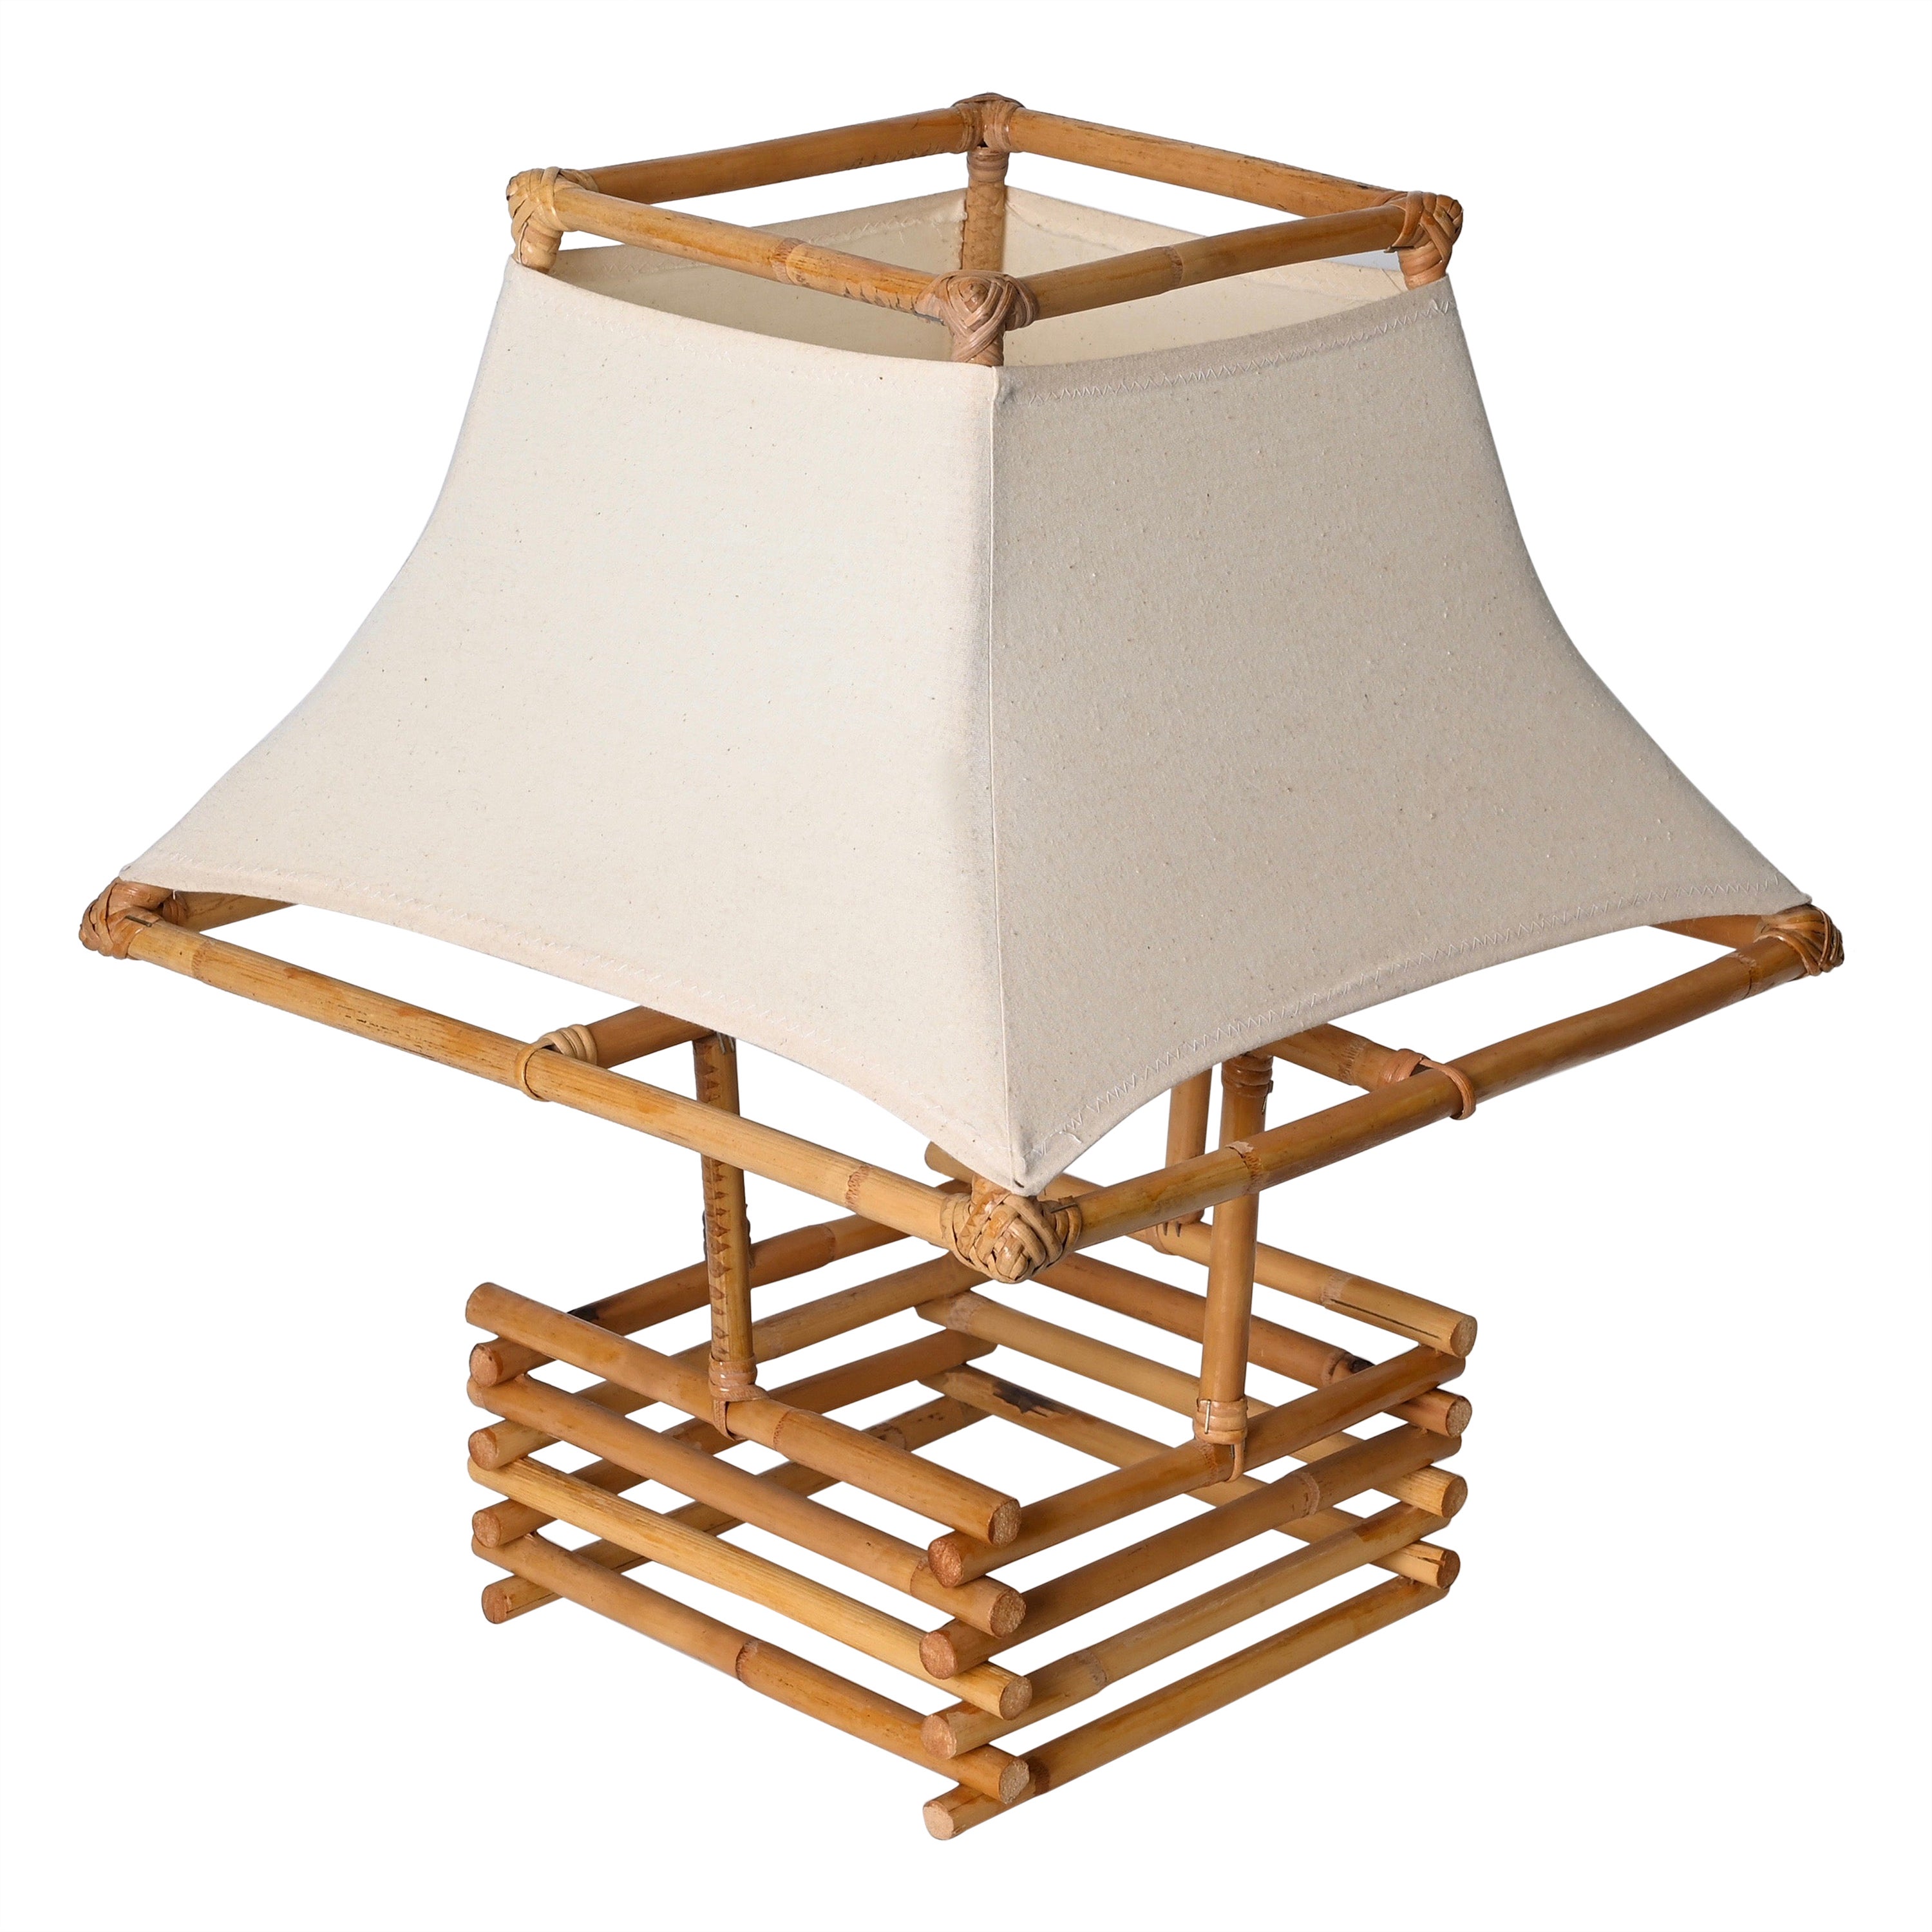 Louis Sognot Rattan, Wicker and White Fabric Table Lamp, France 1960s